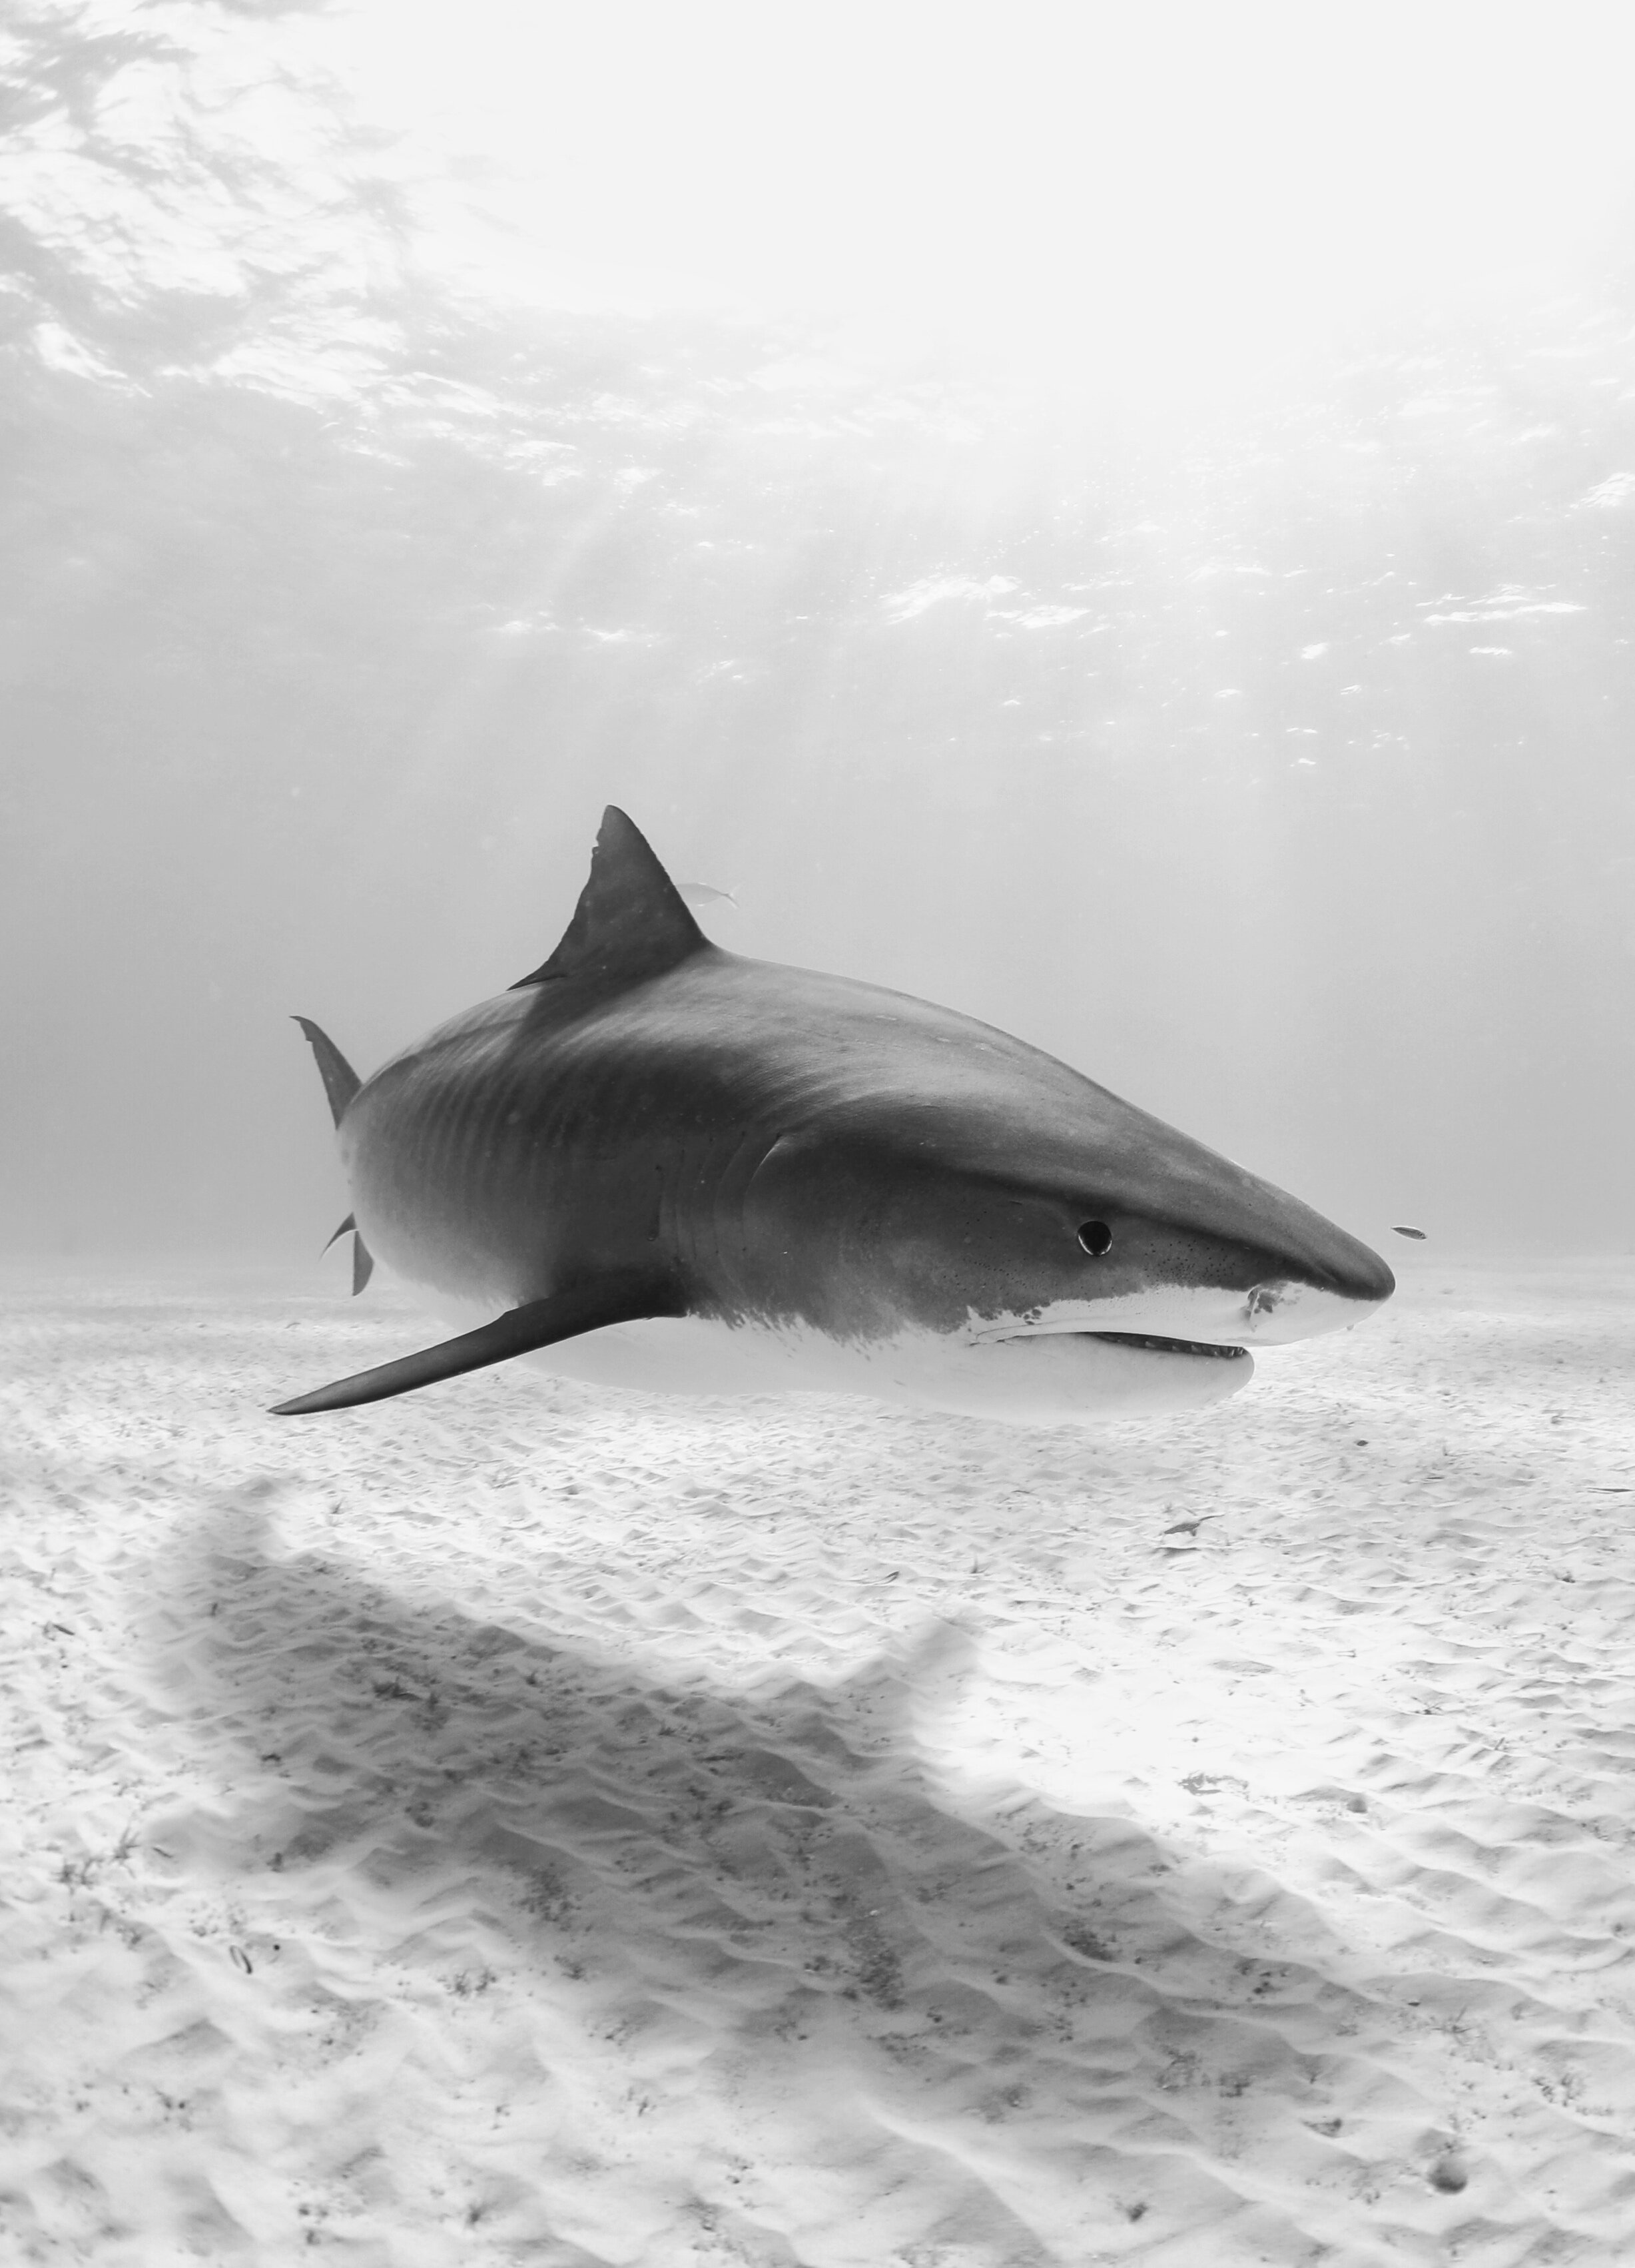 Caribbean sharks in need of large marine protected areas